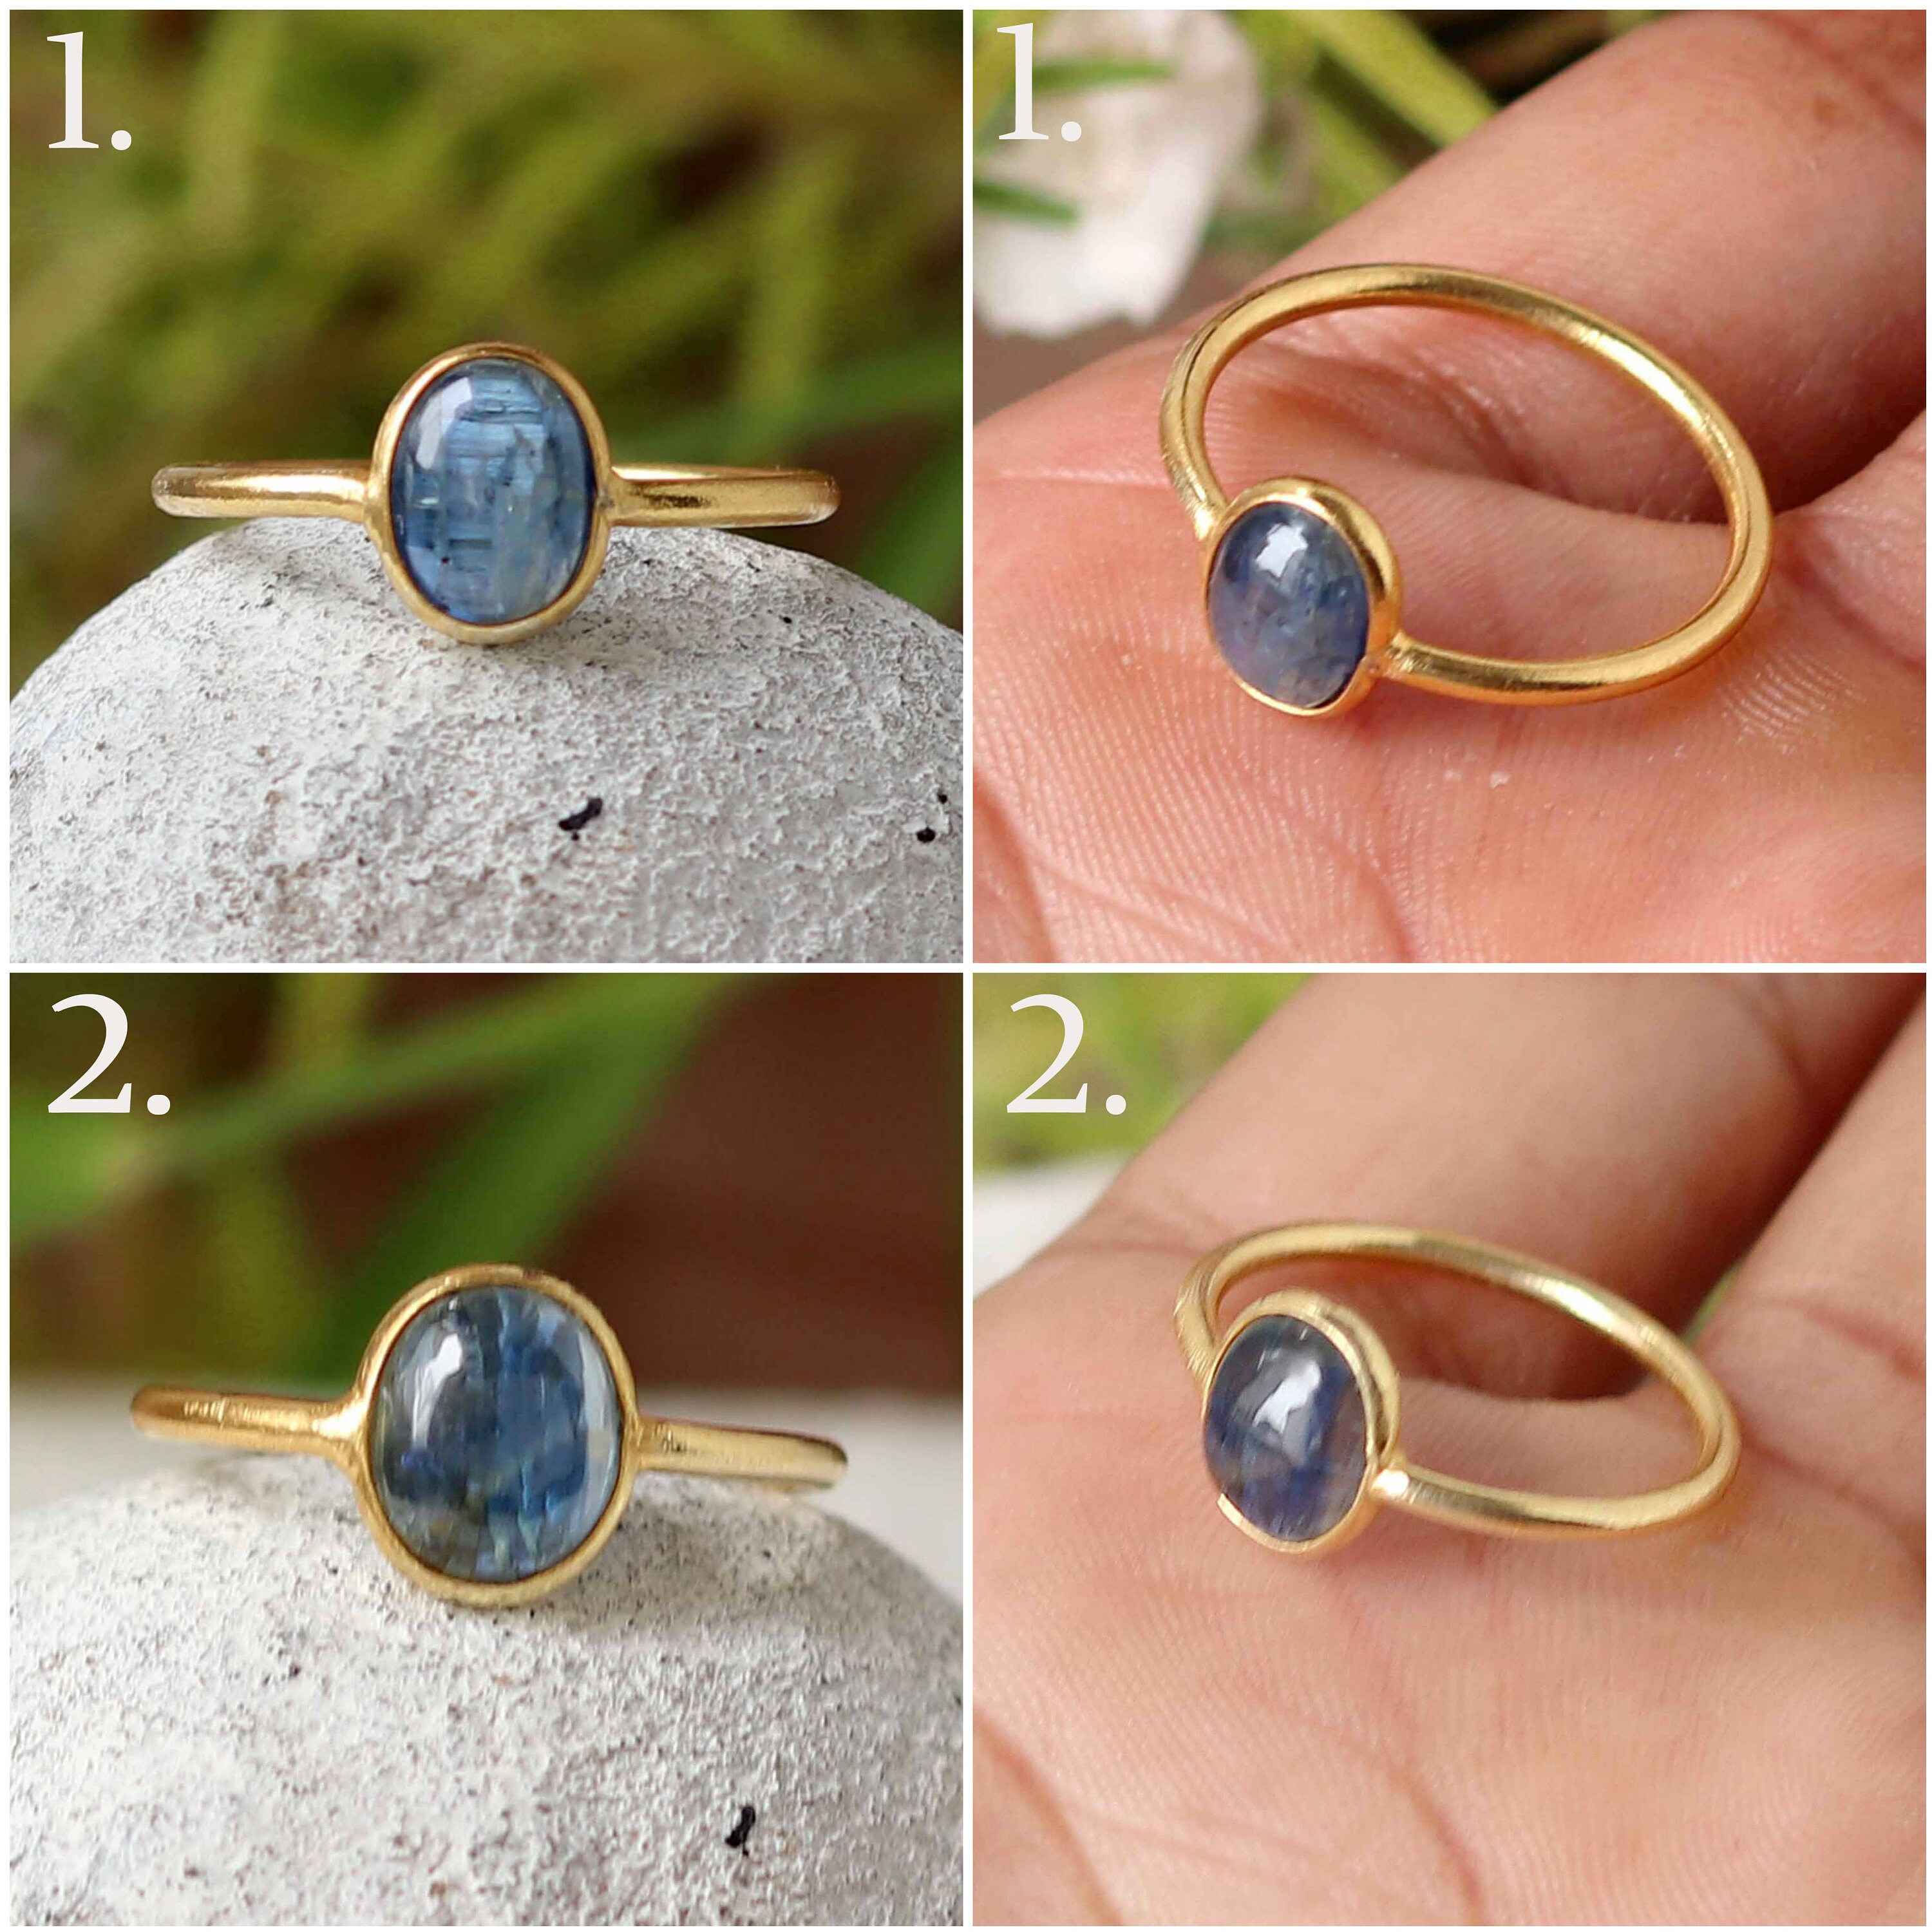 Kyanite Ring, Gold Plated, Statement Ring For Women Gemstone Ring, Blue Kyanite, Rings, Kyanite, February March Birthstone Gift Her